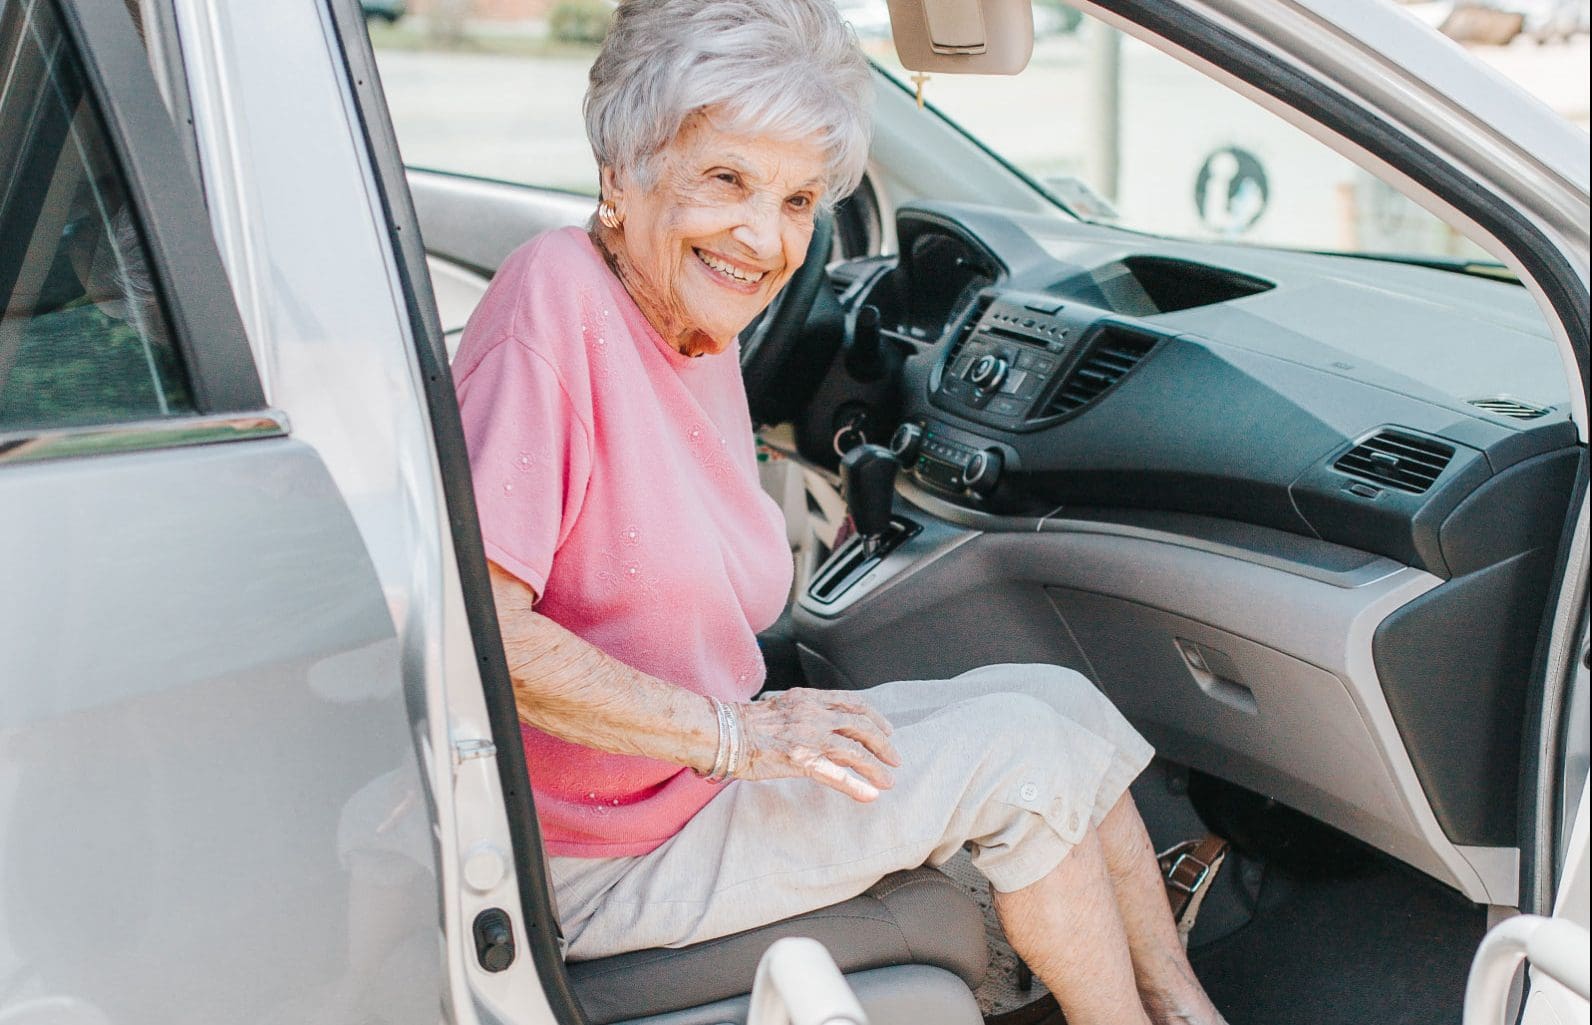 Elderly lady getting out of a car